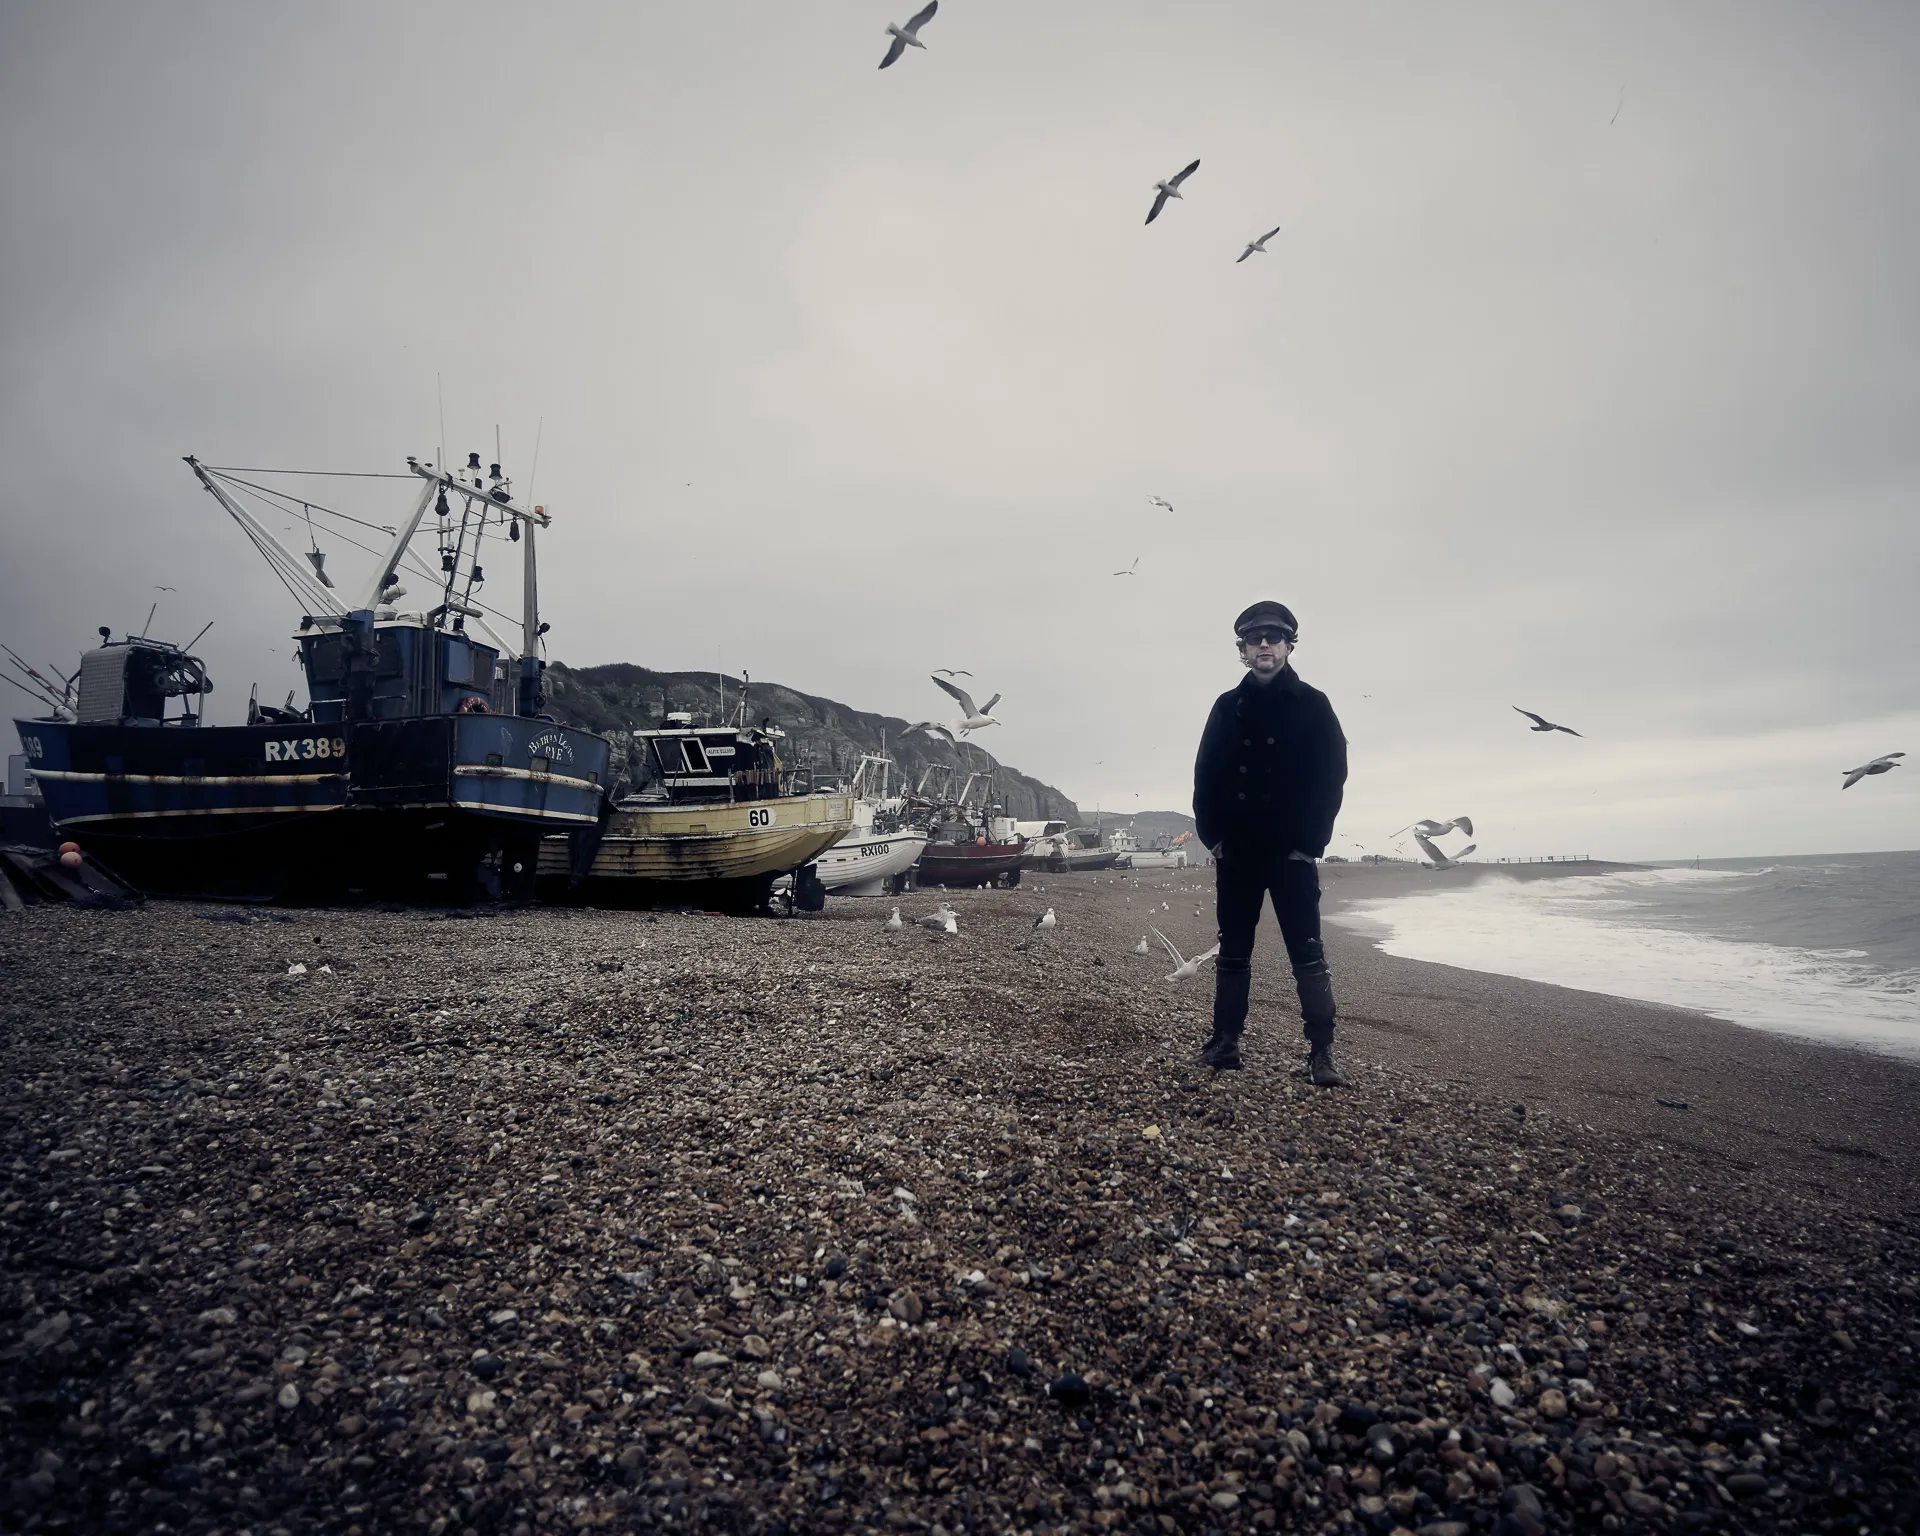 Photograph of Hal Ritson on Hastings Beach